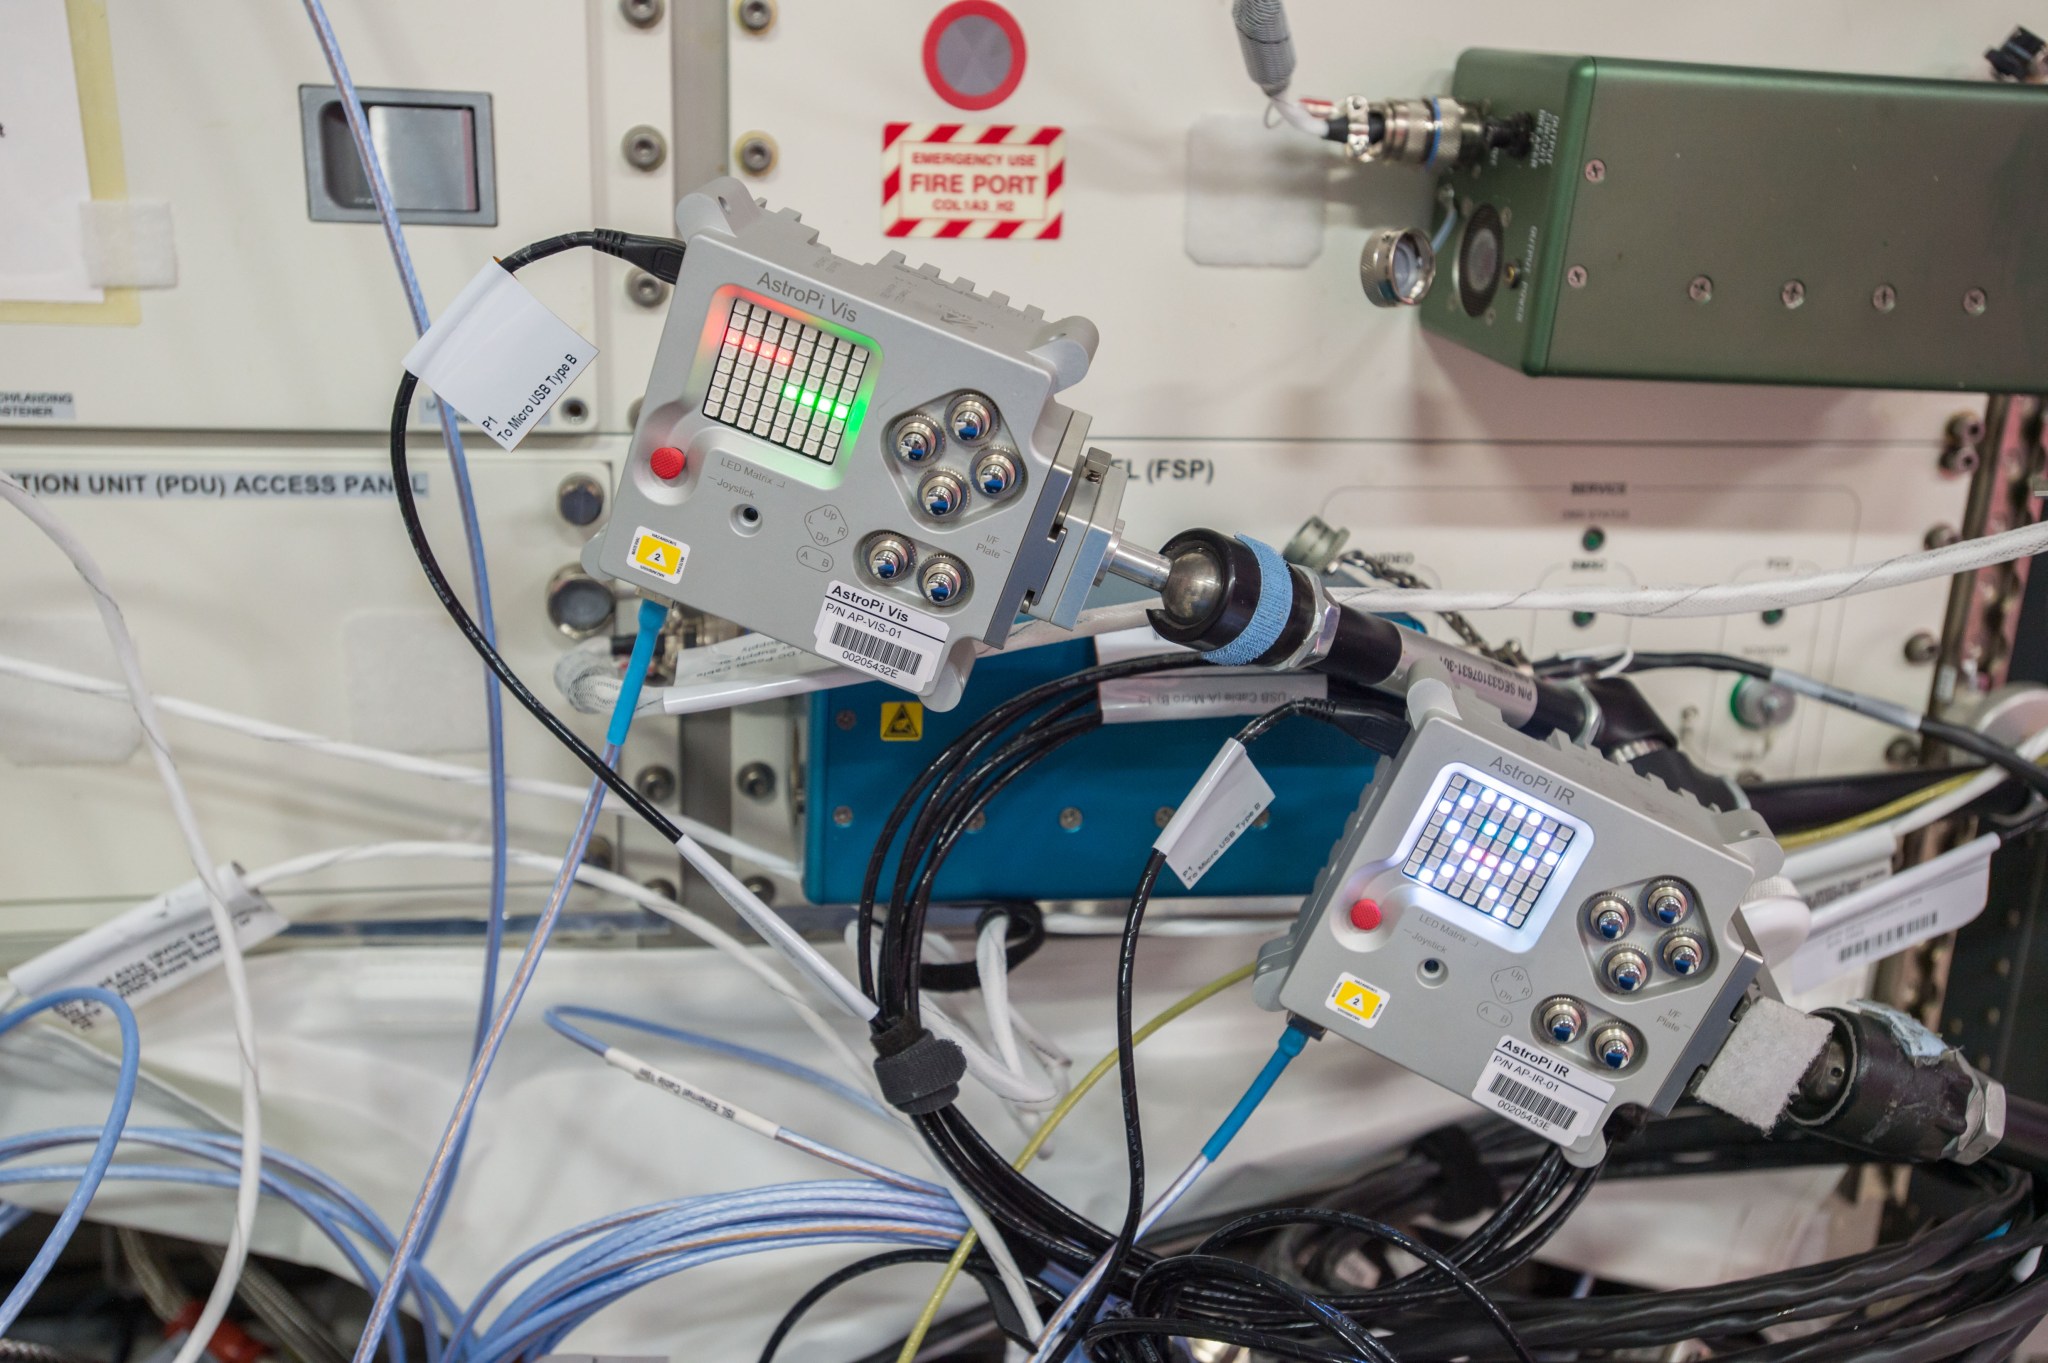 These AstroPi computers on the space station support a student project that encourages interest in computing and coding and other science, technology, engineering, and mathematics (STEM) subjects.